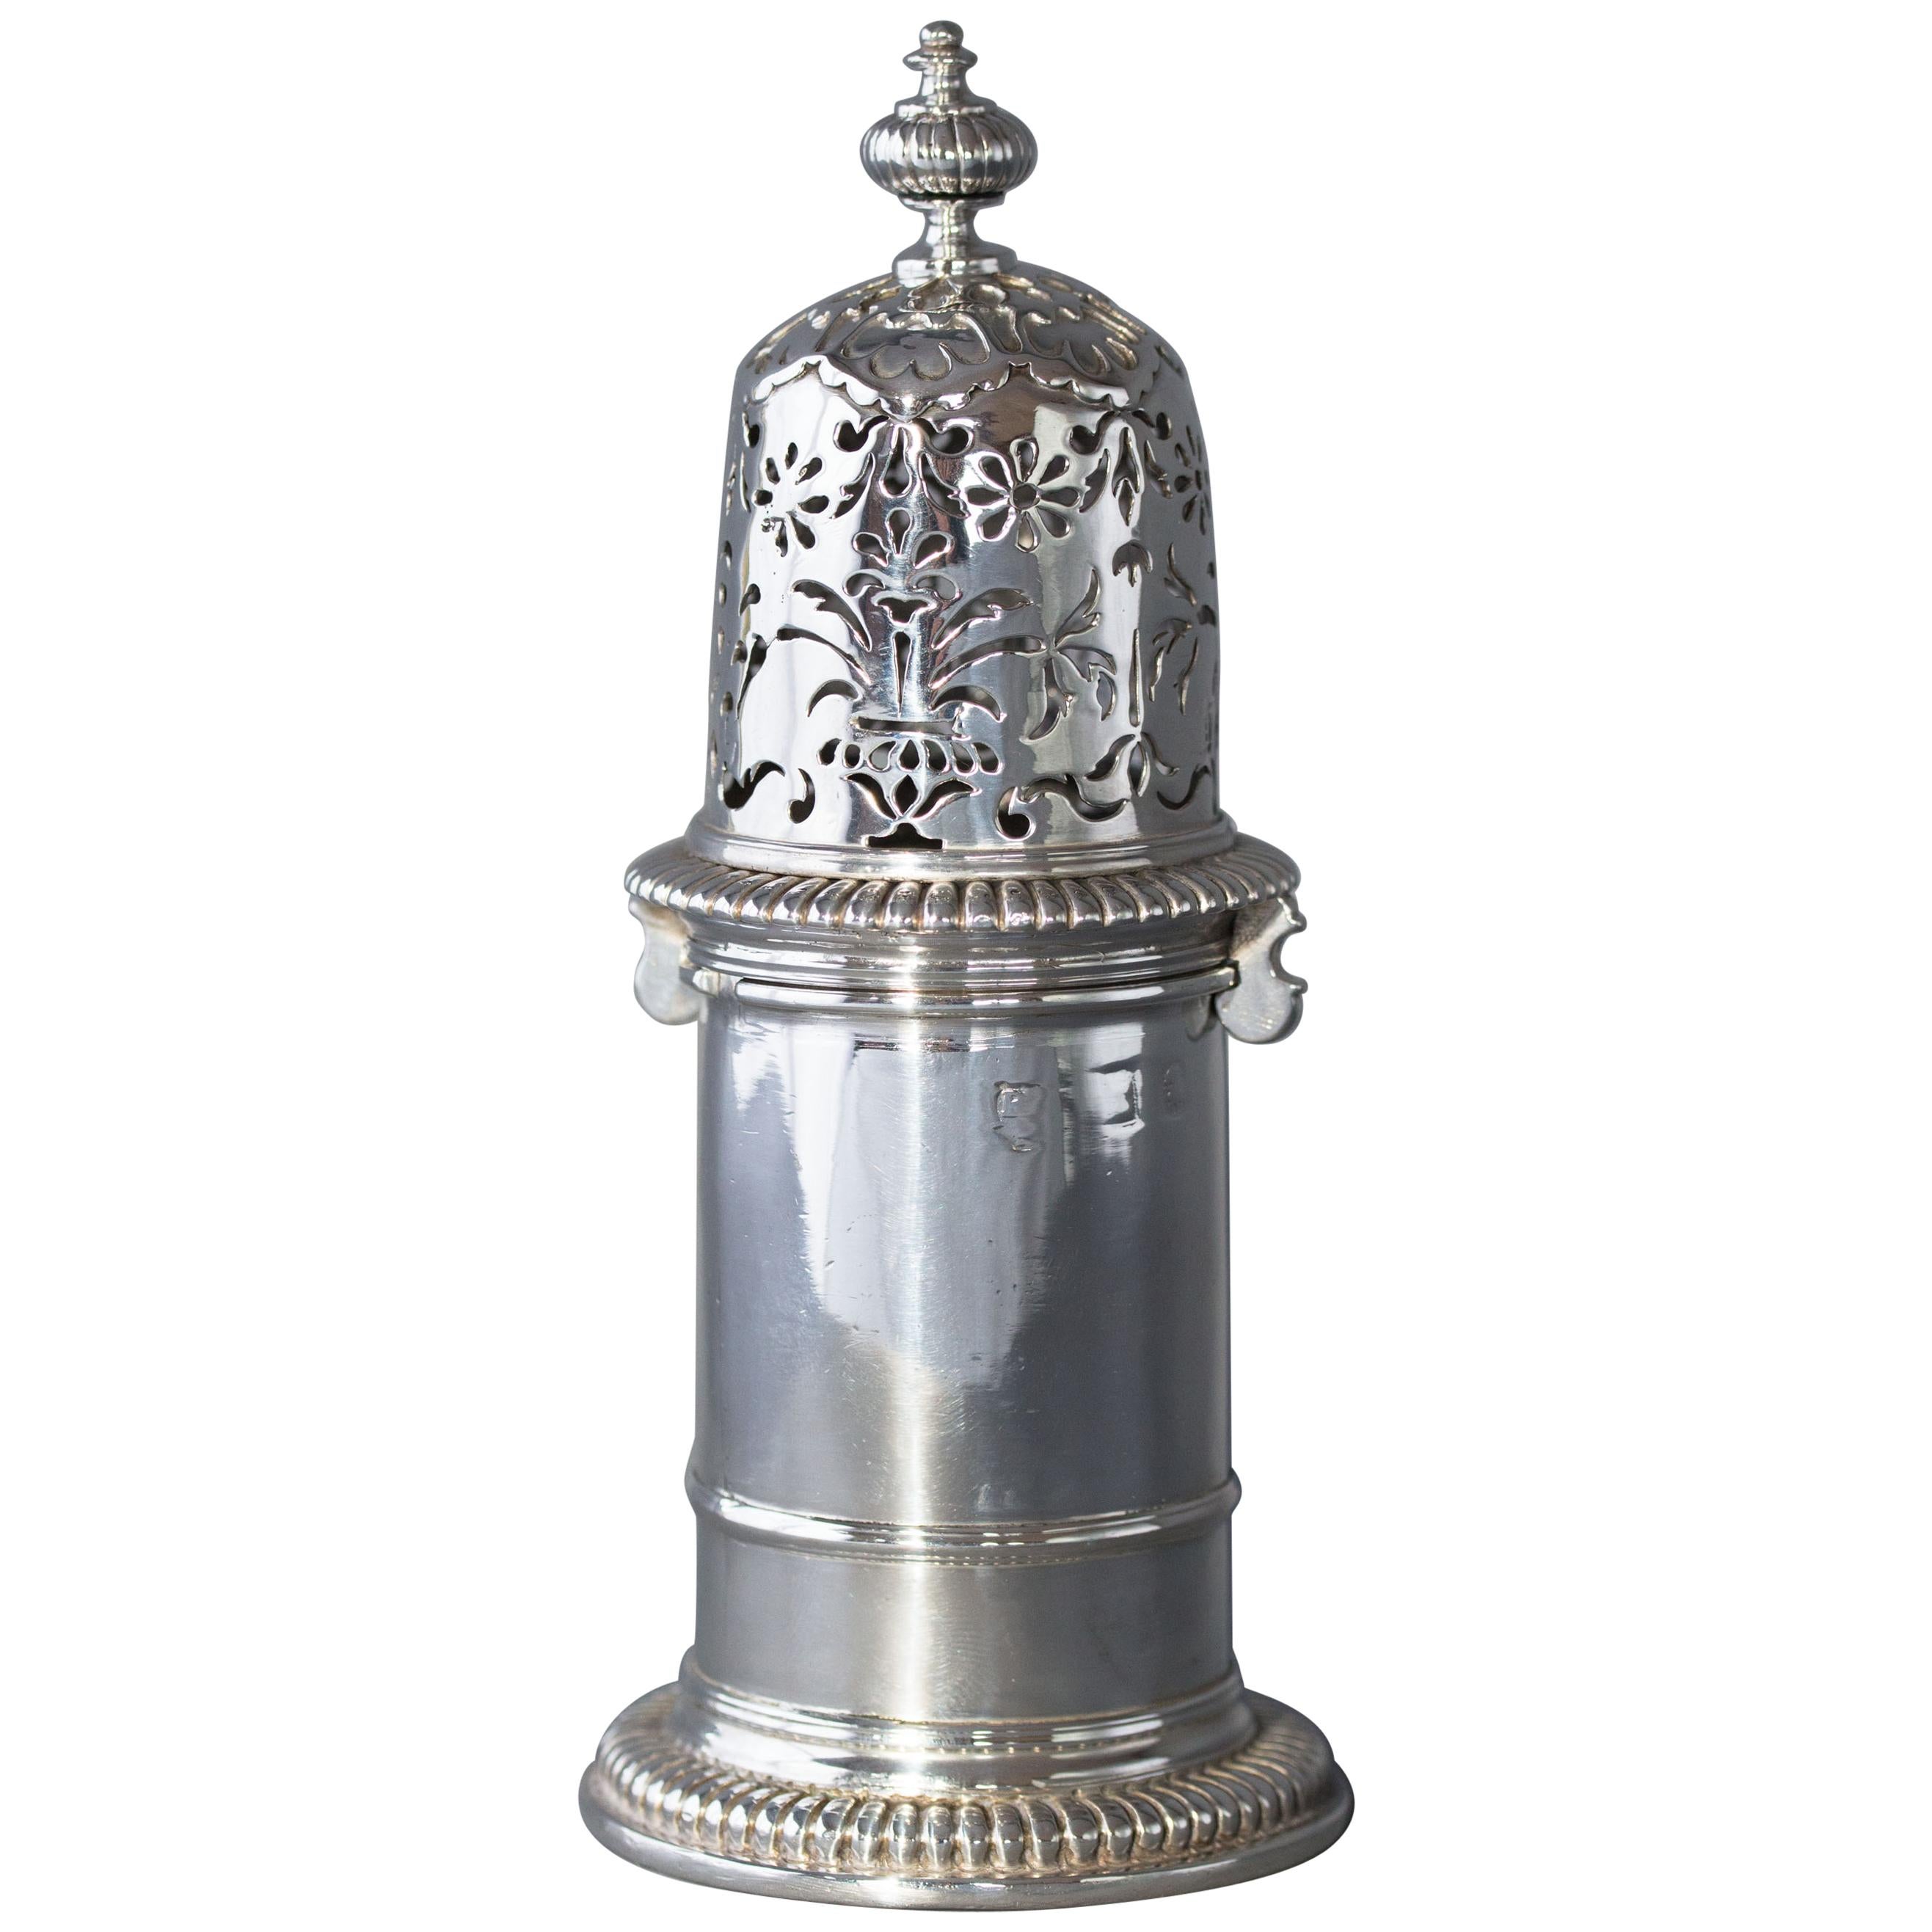 William III Britannia Silver Lighthouse Caster, London 1698 by Andrew Raven